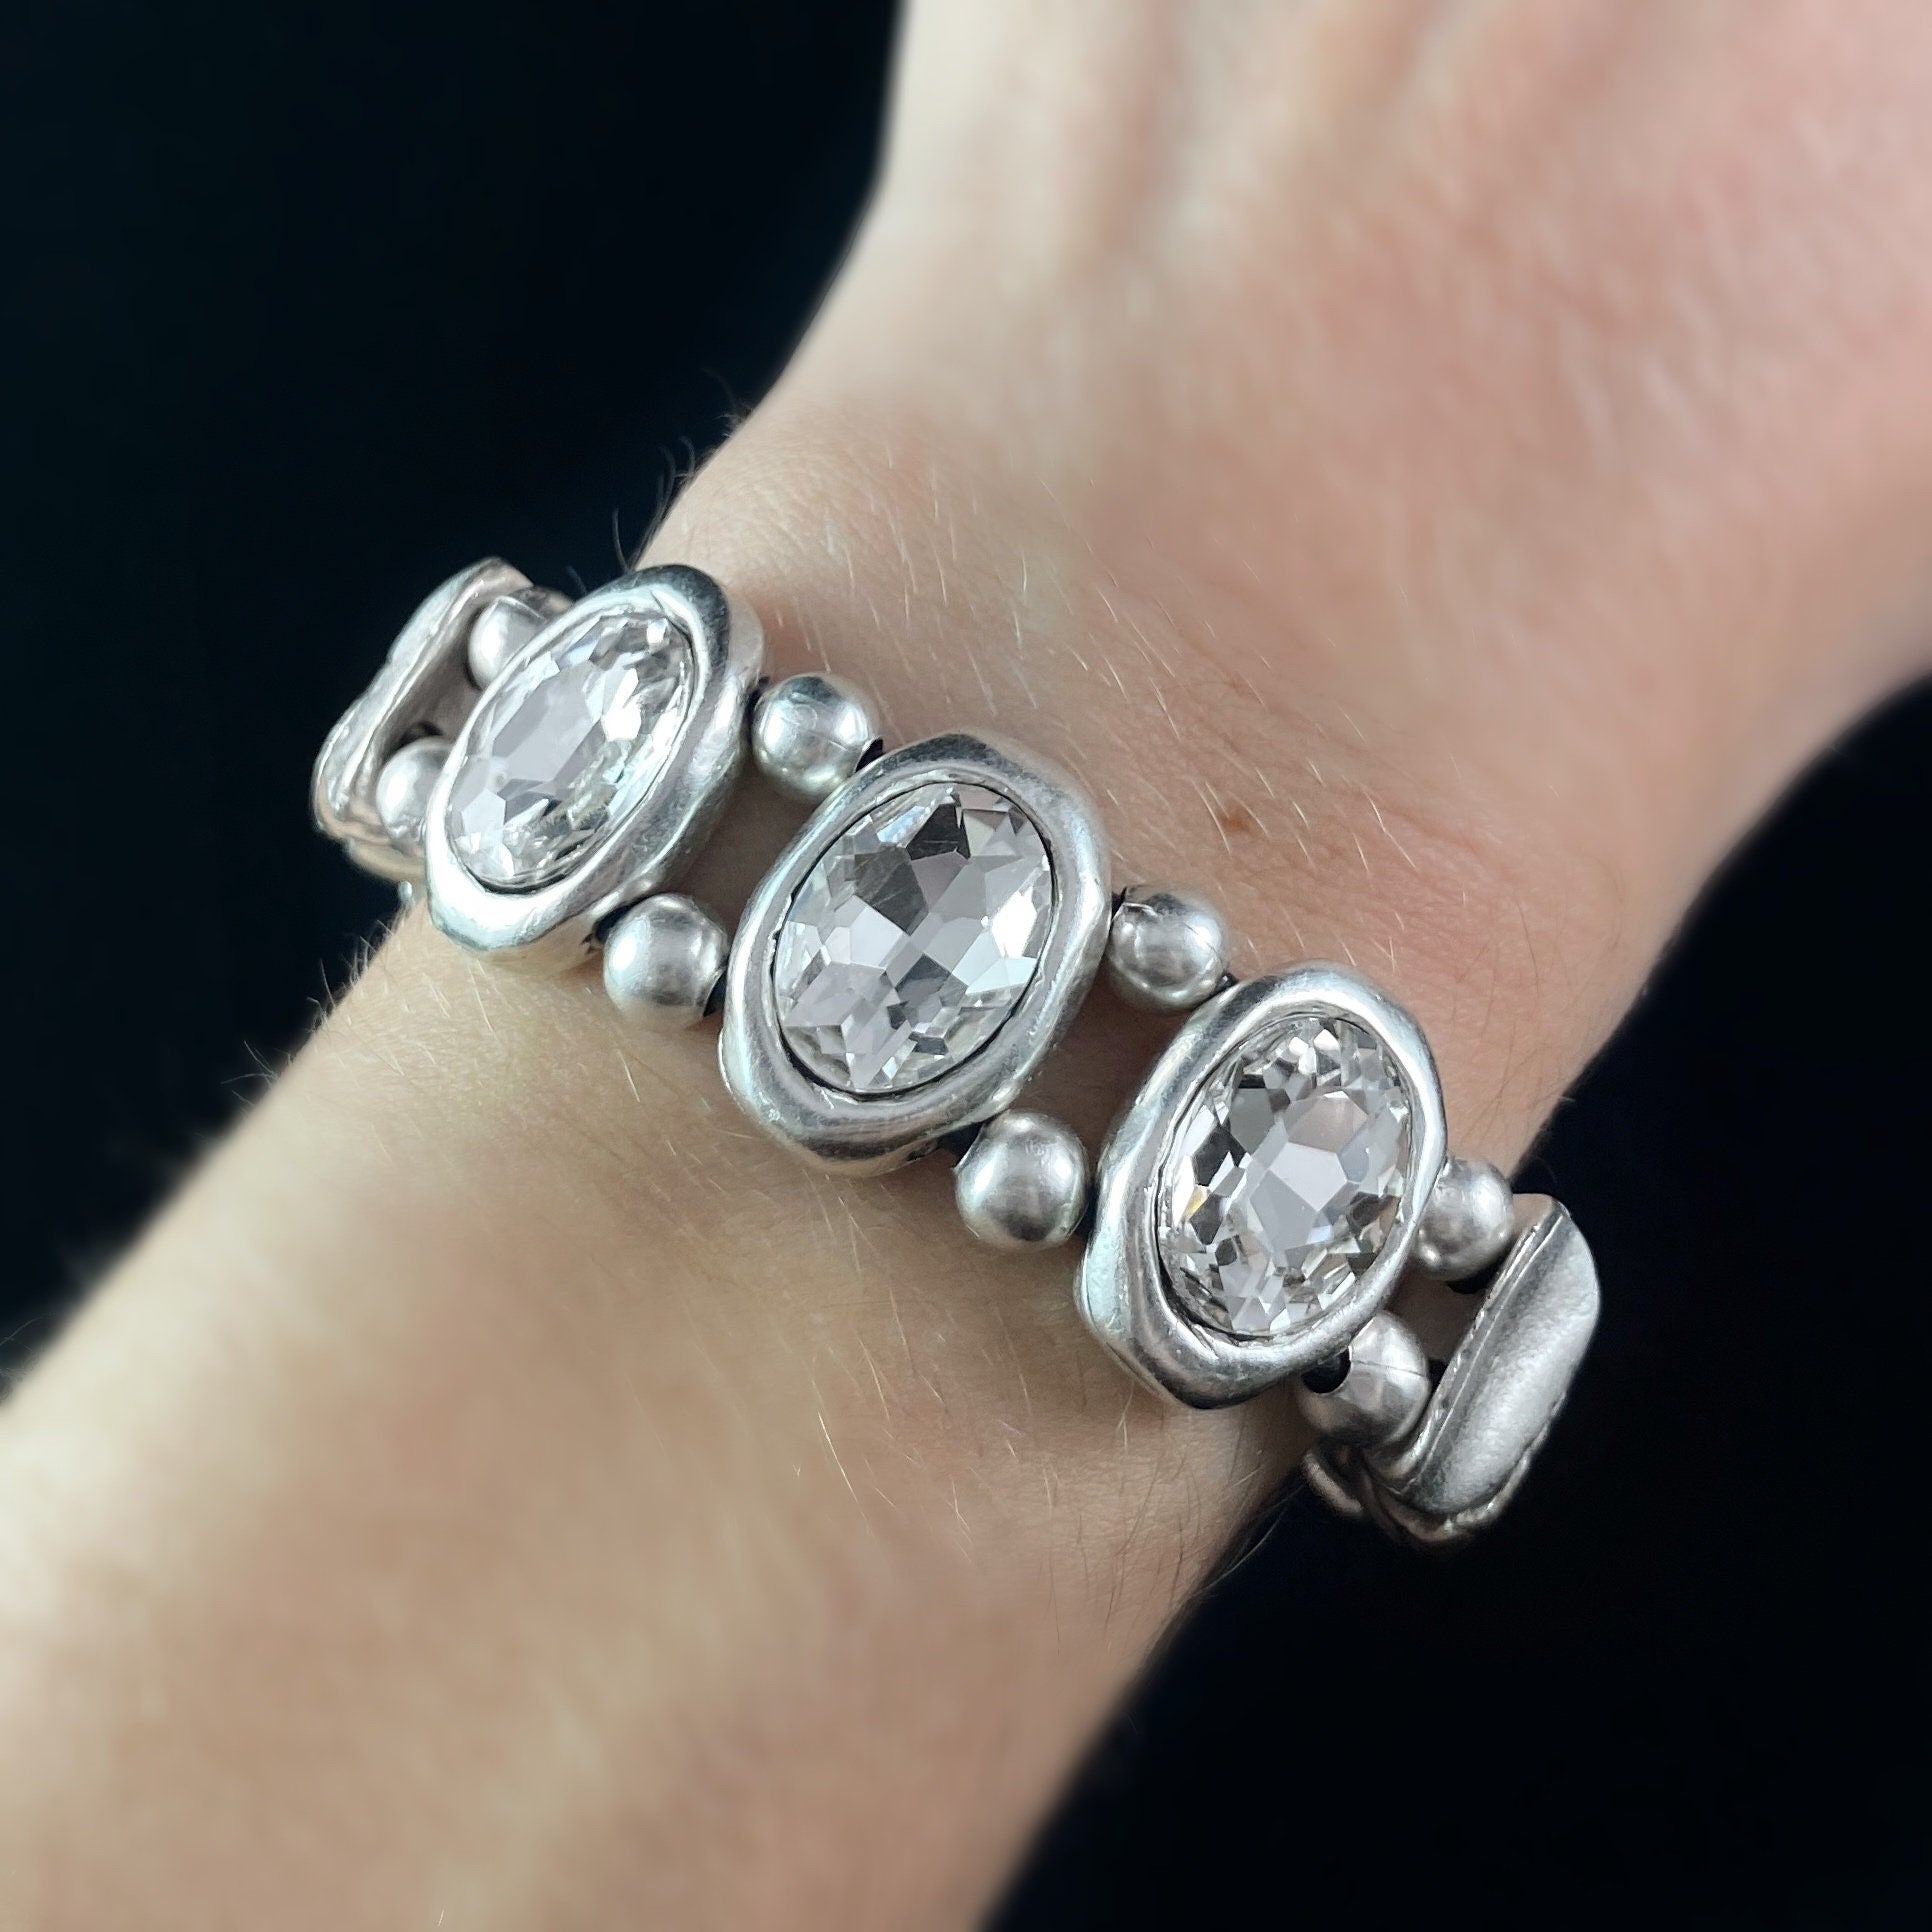 Oval Crystal Bracelet with Silver Abstract Beads and Leather Closure, Handmade, Nickel Free